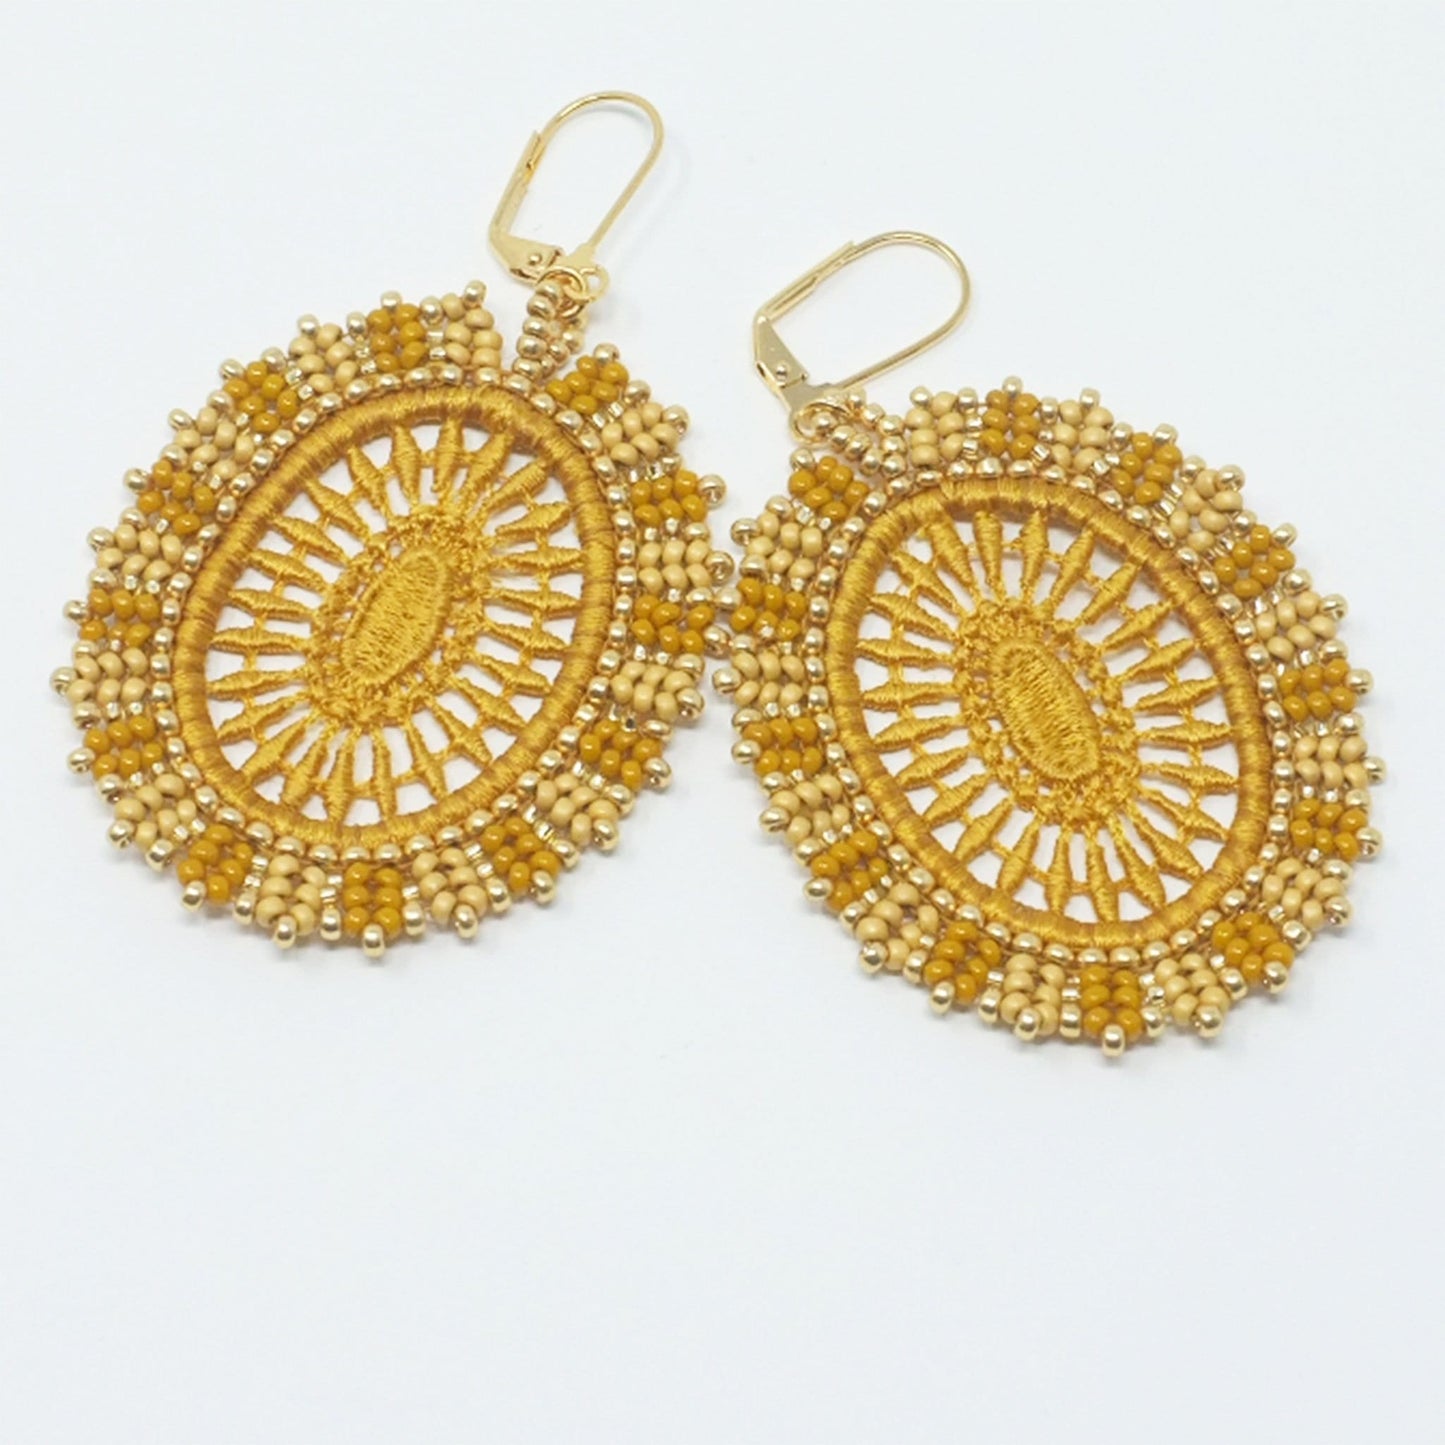 Yellow Oval Lace Earrings with bead embroidery